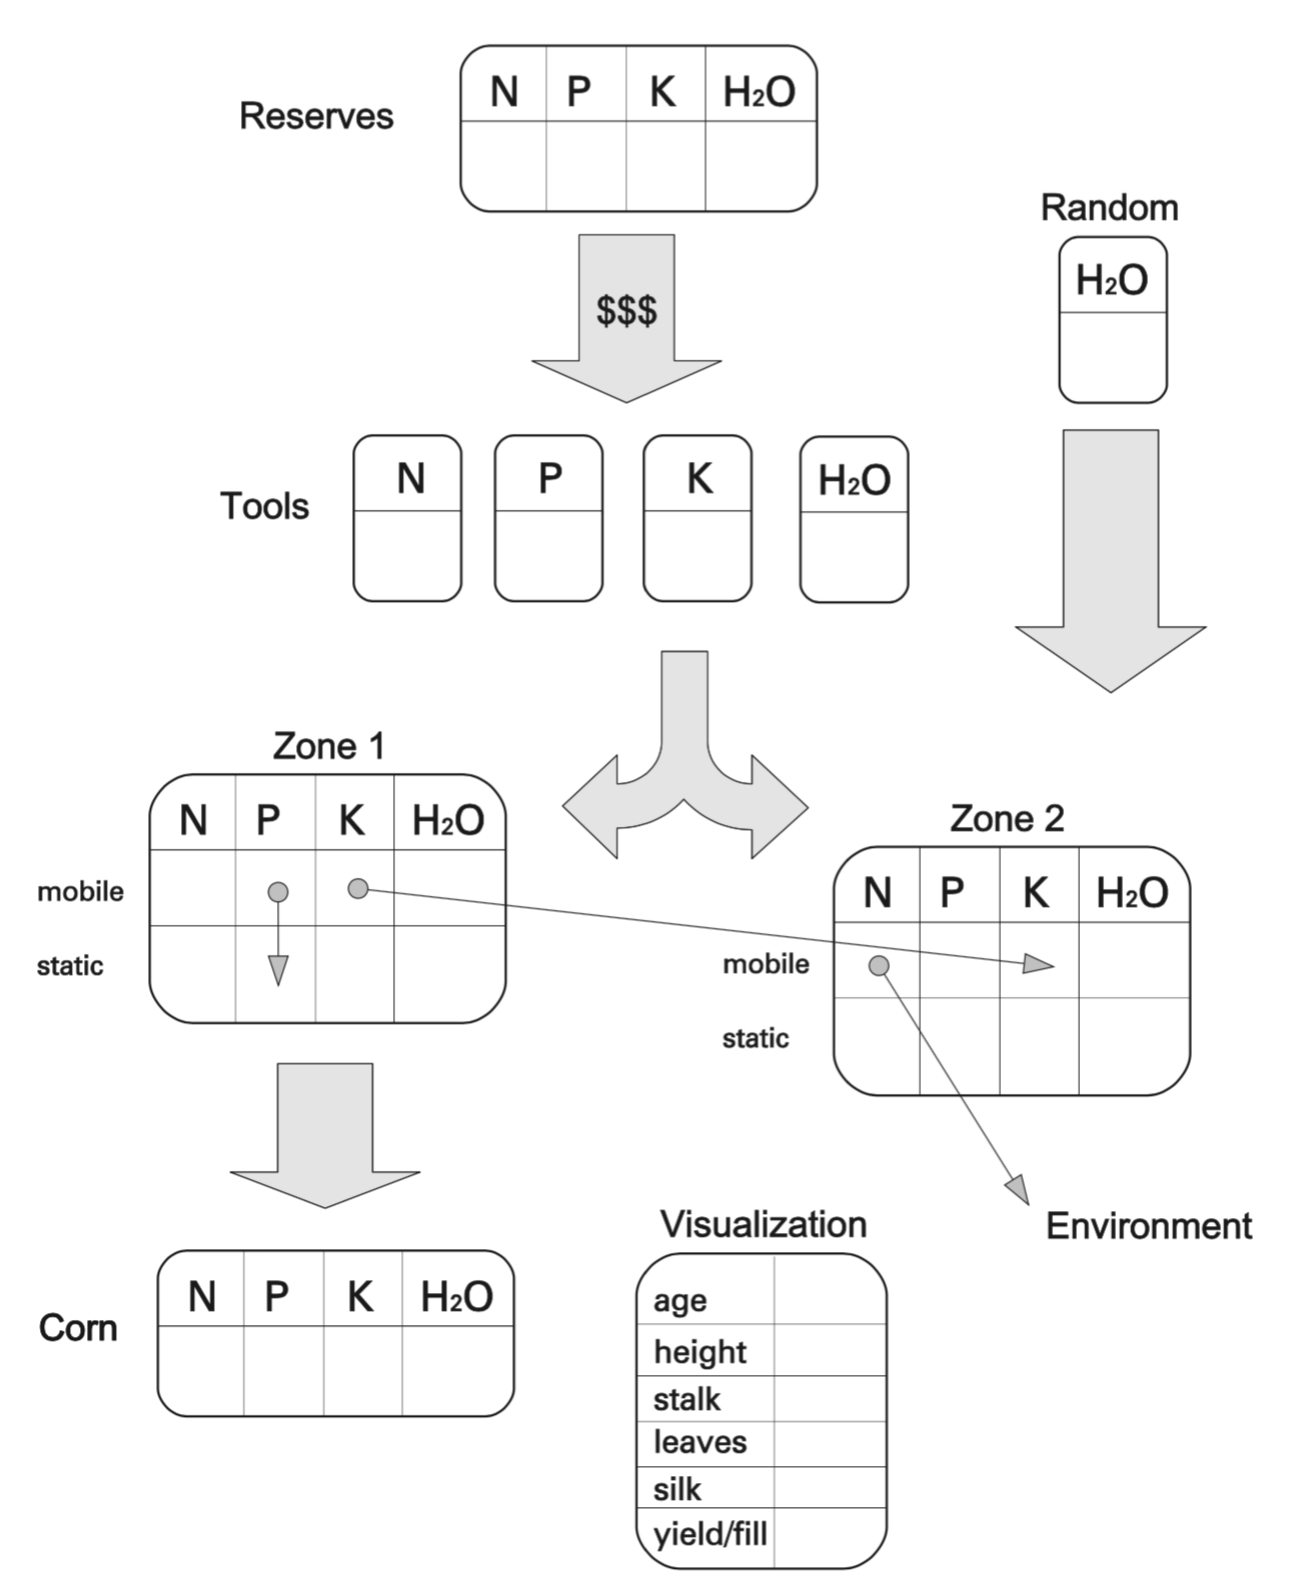 Schematic diagram of crop growth model created as part of the game